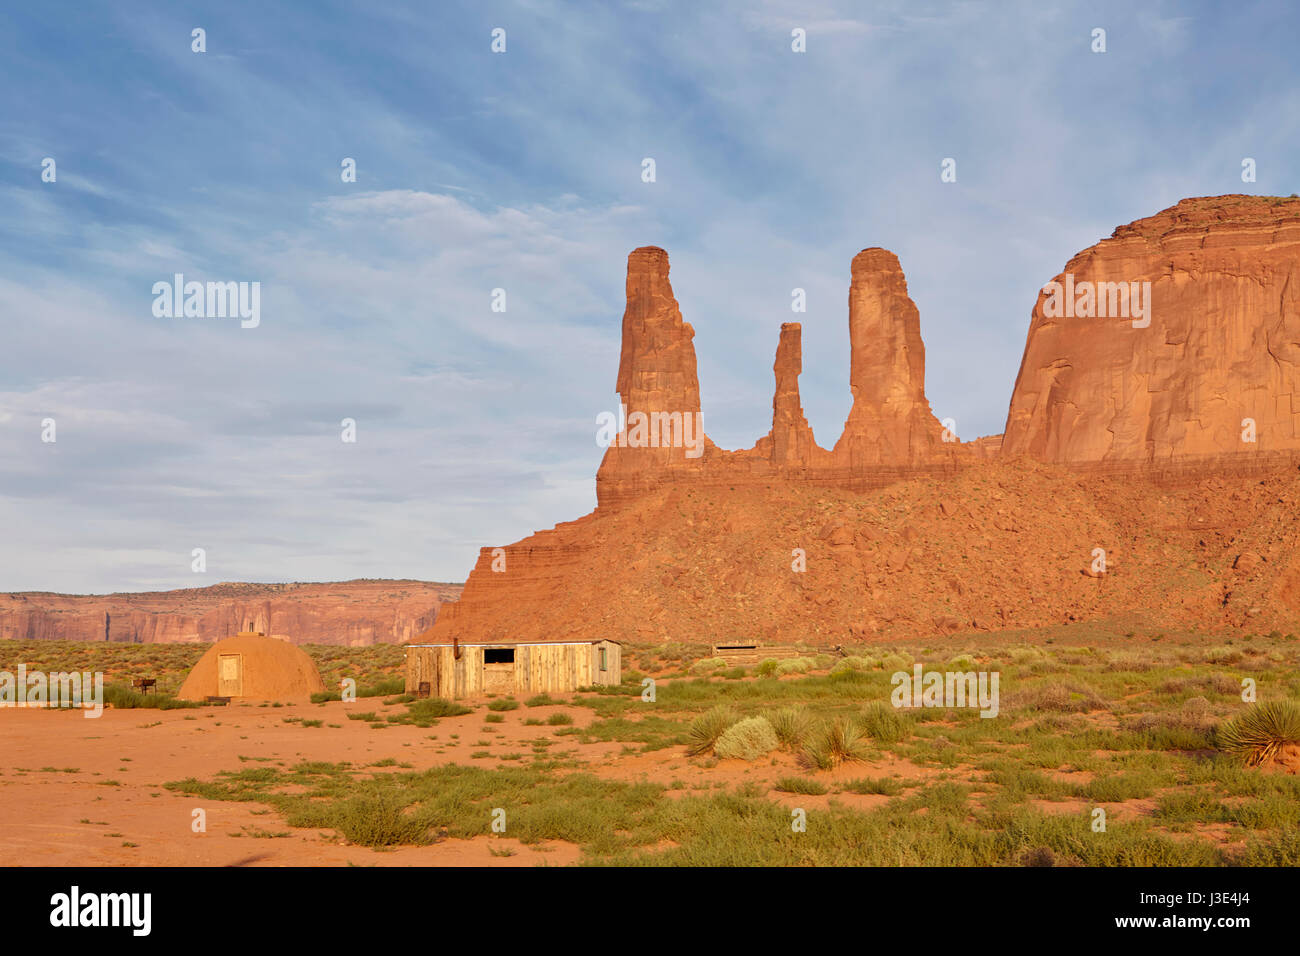 Monument Valley, Arizona, United States Banque D'Images